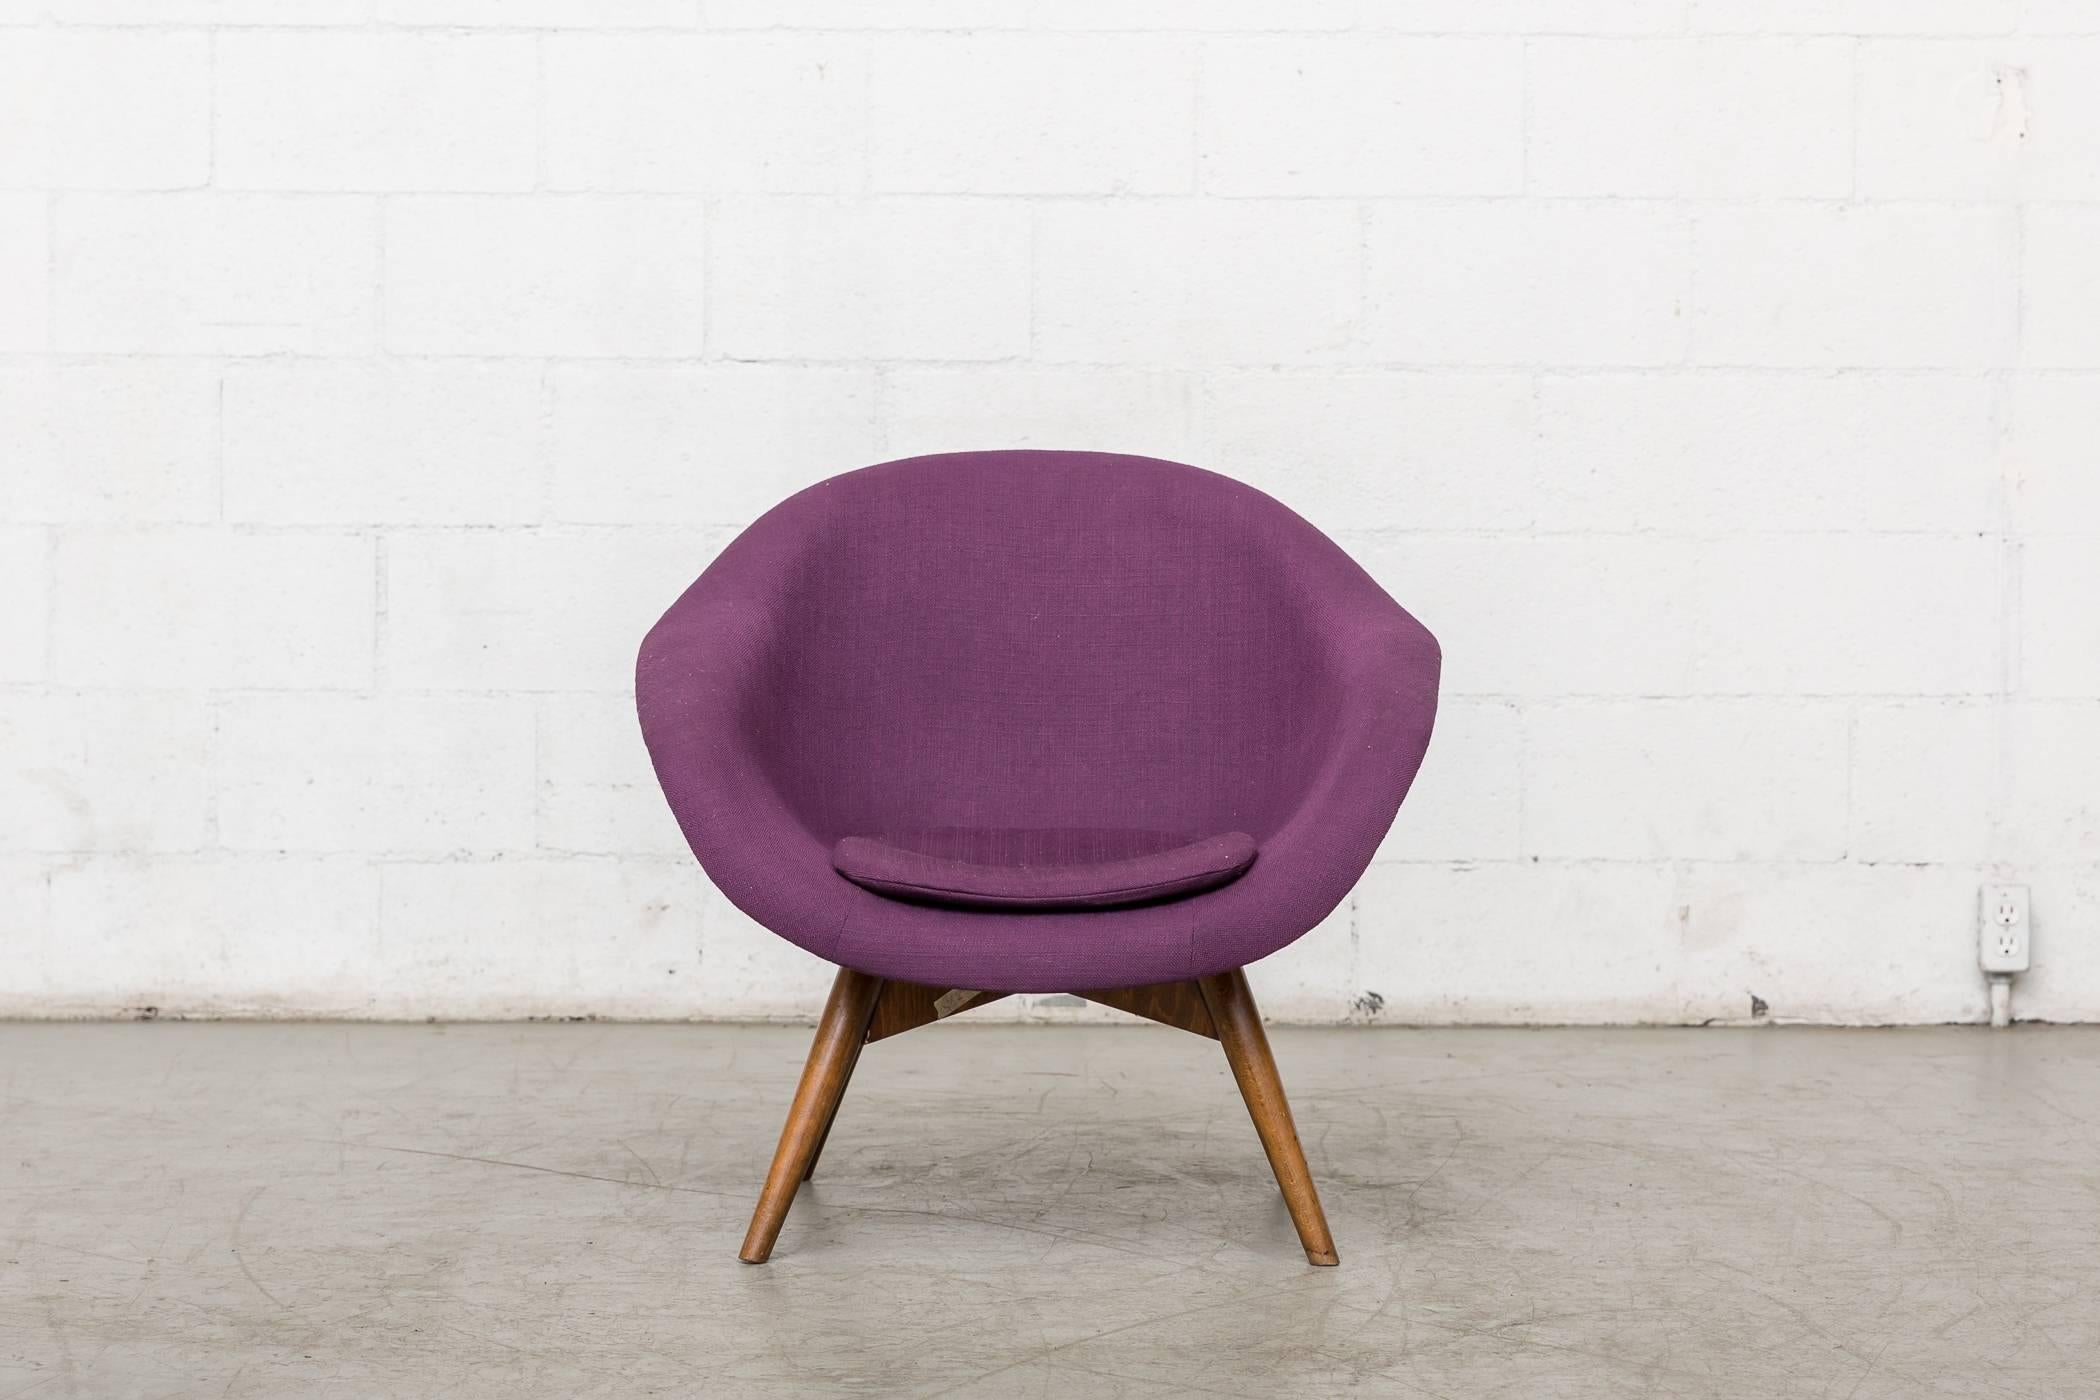 Newly upholstered purple Saarinen Style Mid-Century Modern bucket chair by Miroslav Navratil with dark stained legs. Frame is in original condition.